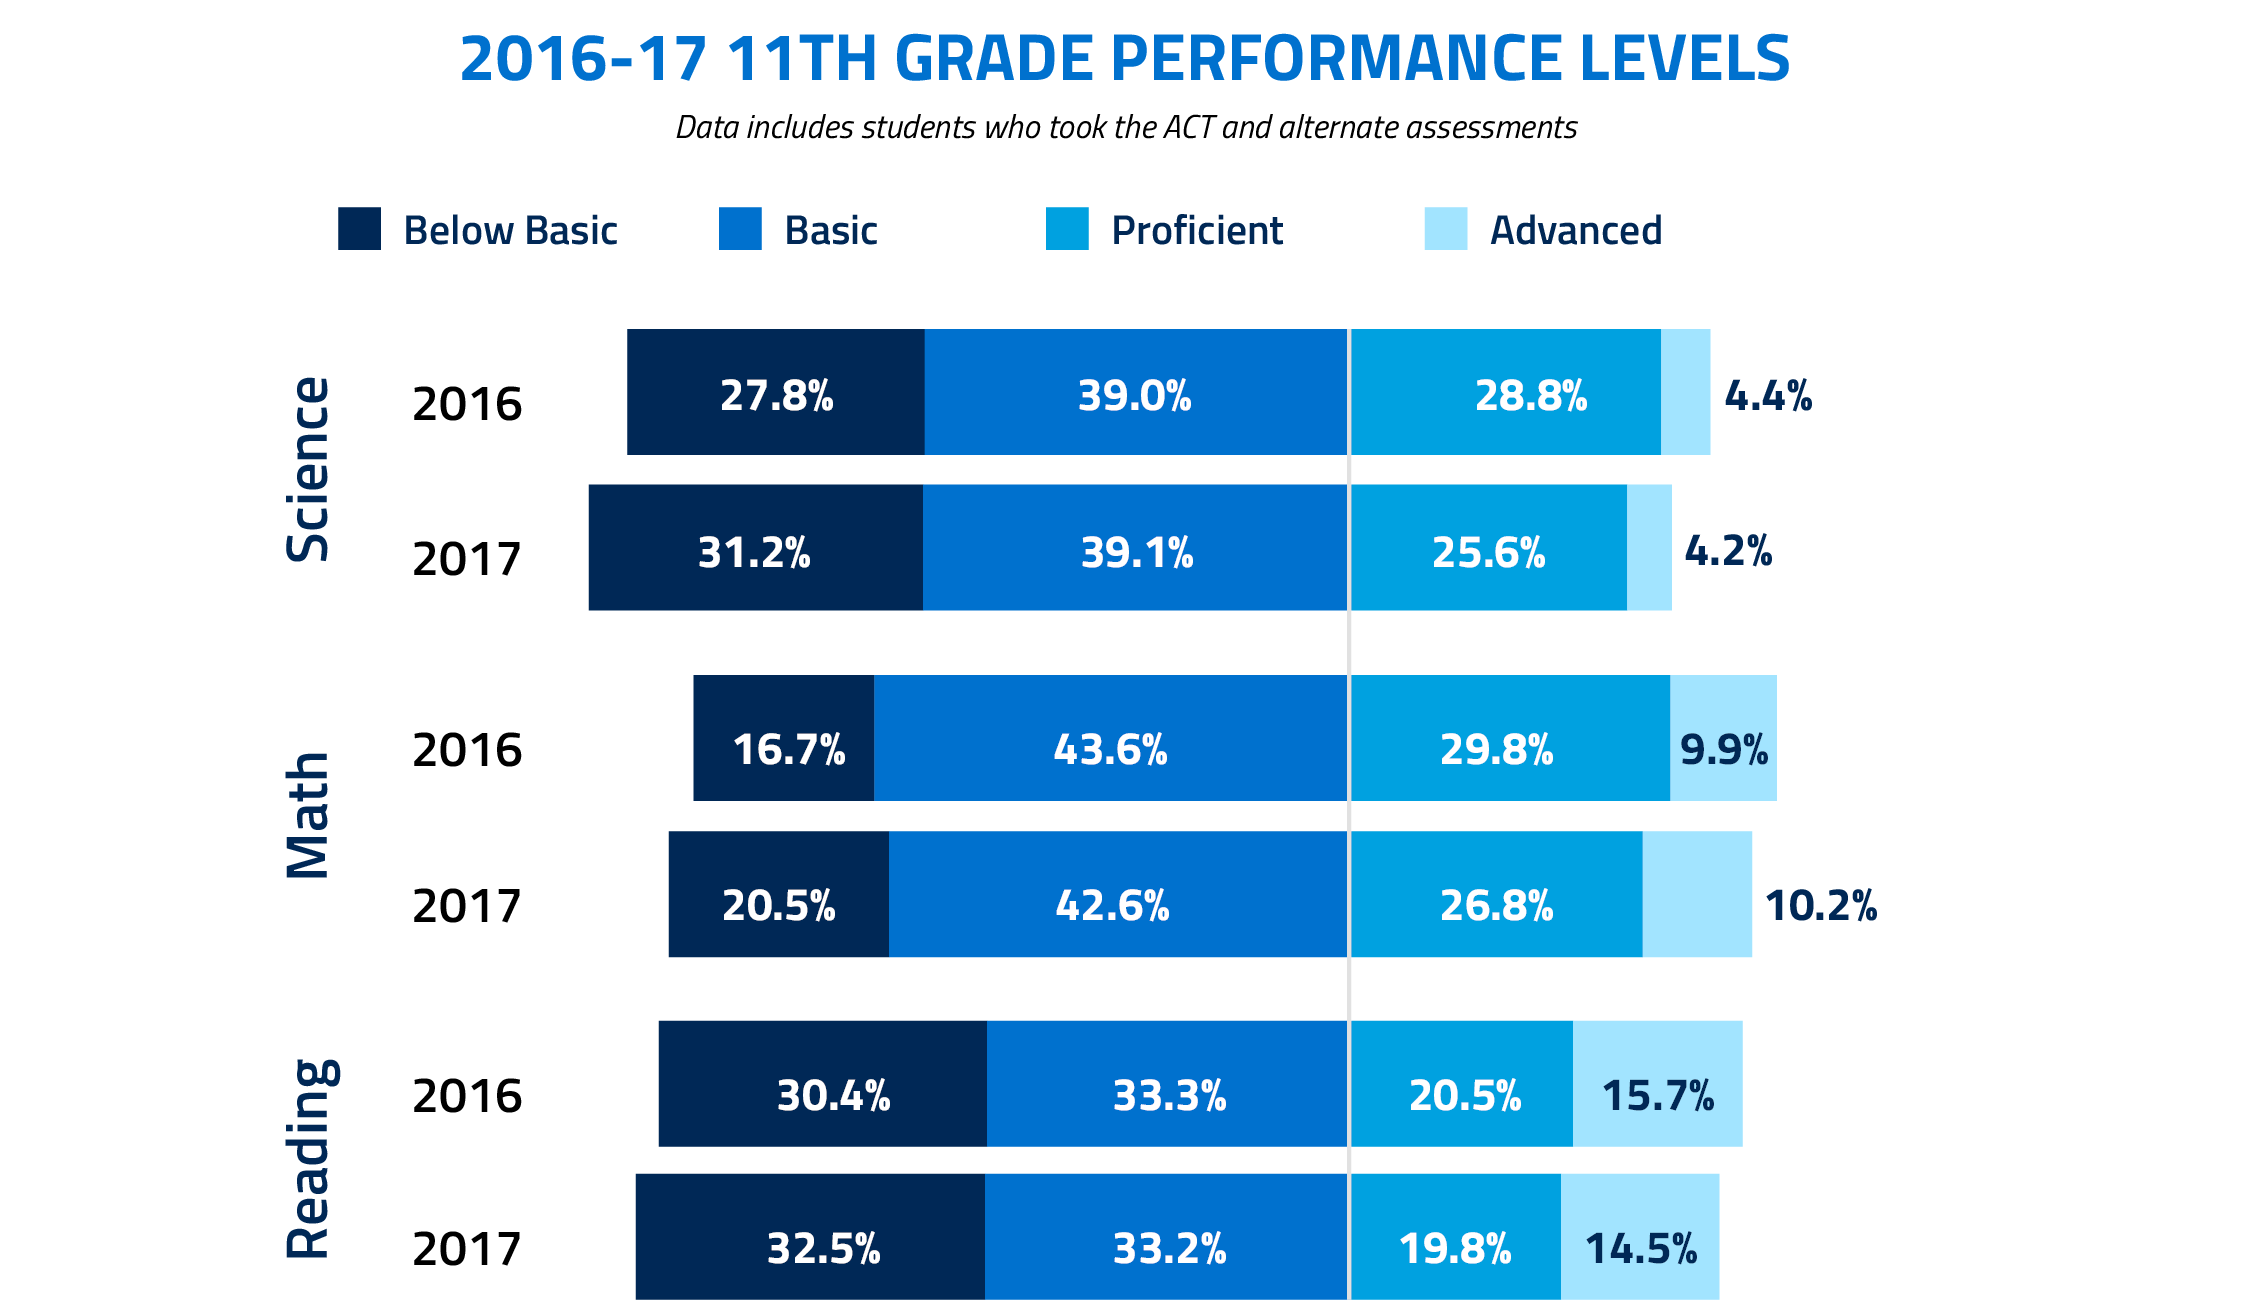 2016-17 11th grade performance levels. Data includes students who took the ACT and alternate assessments.